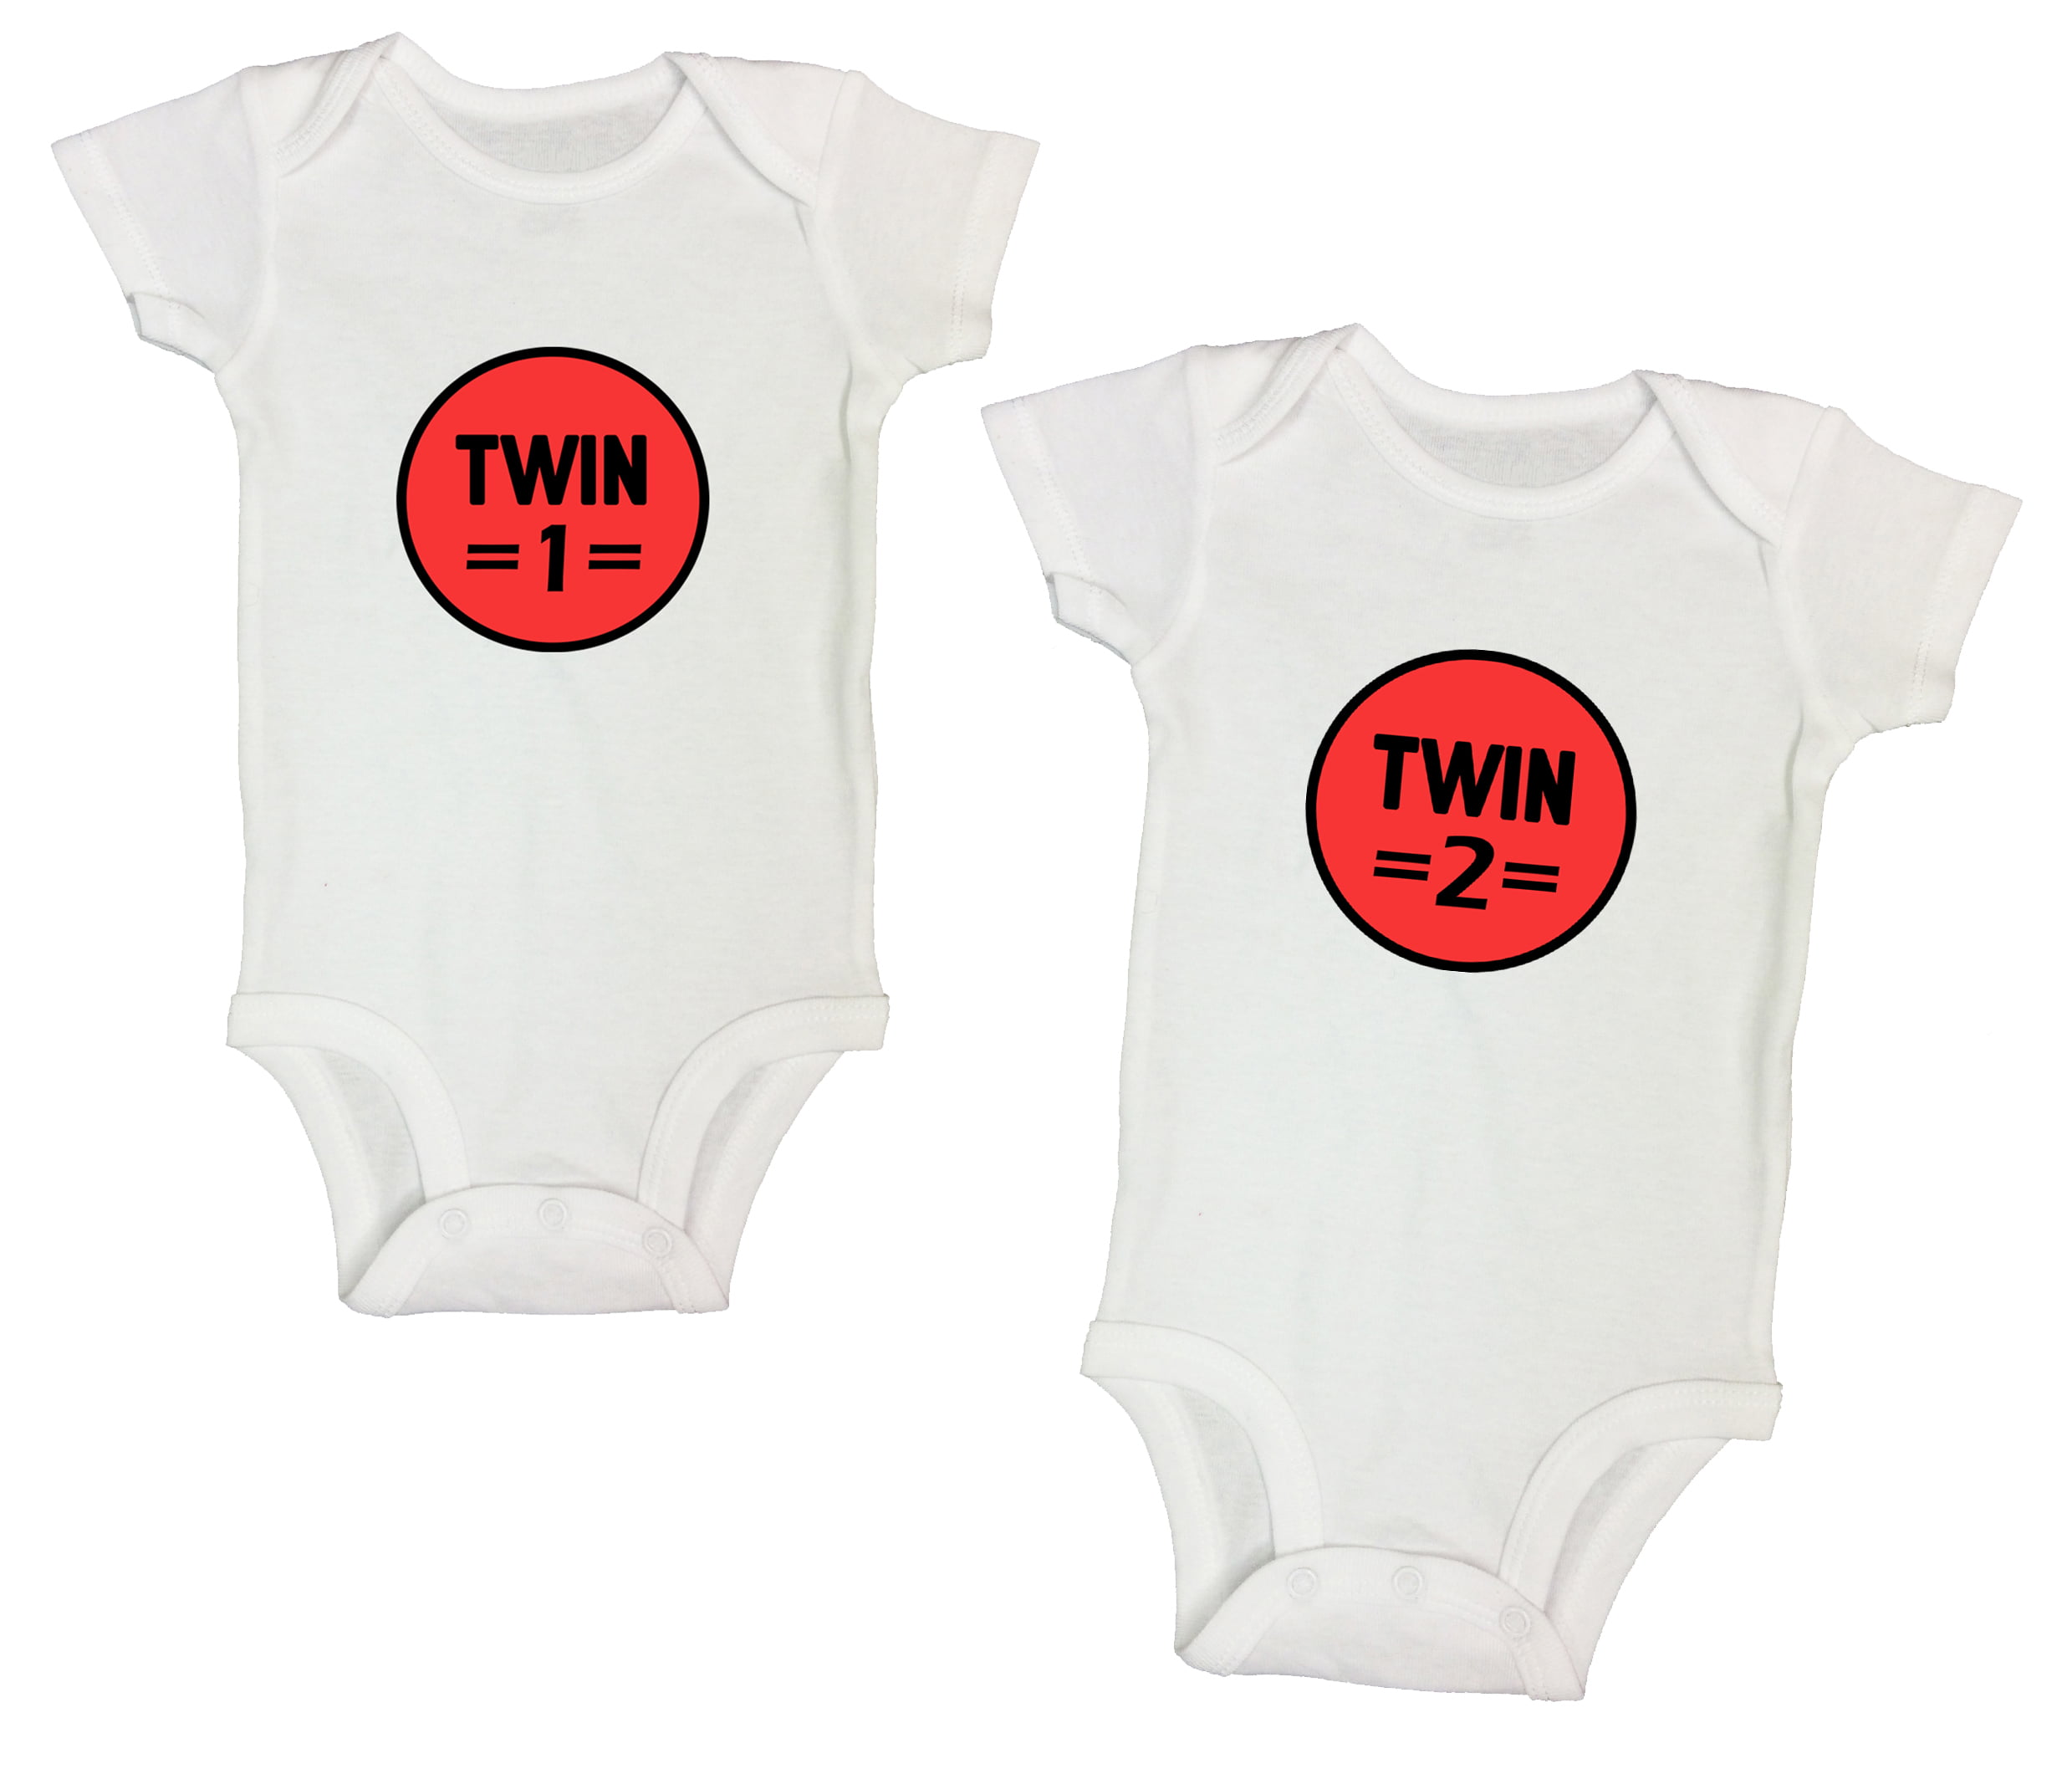 twin shirts for adults